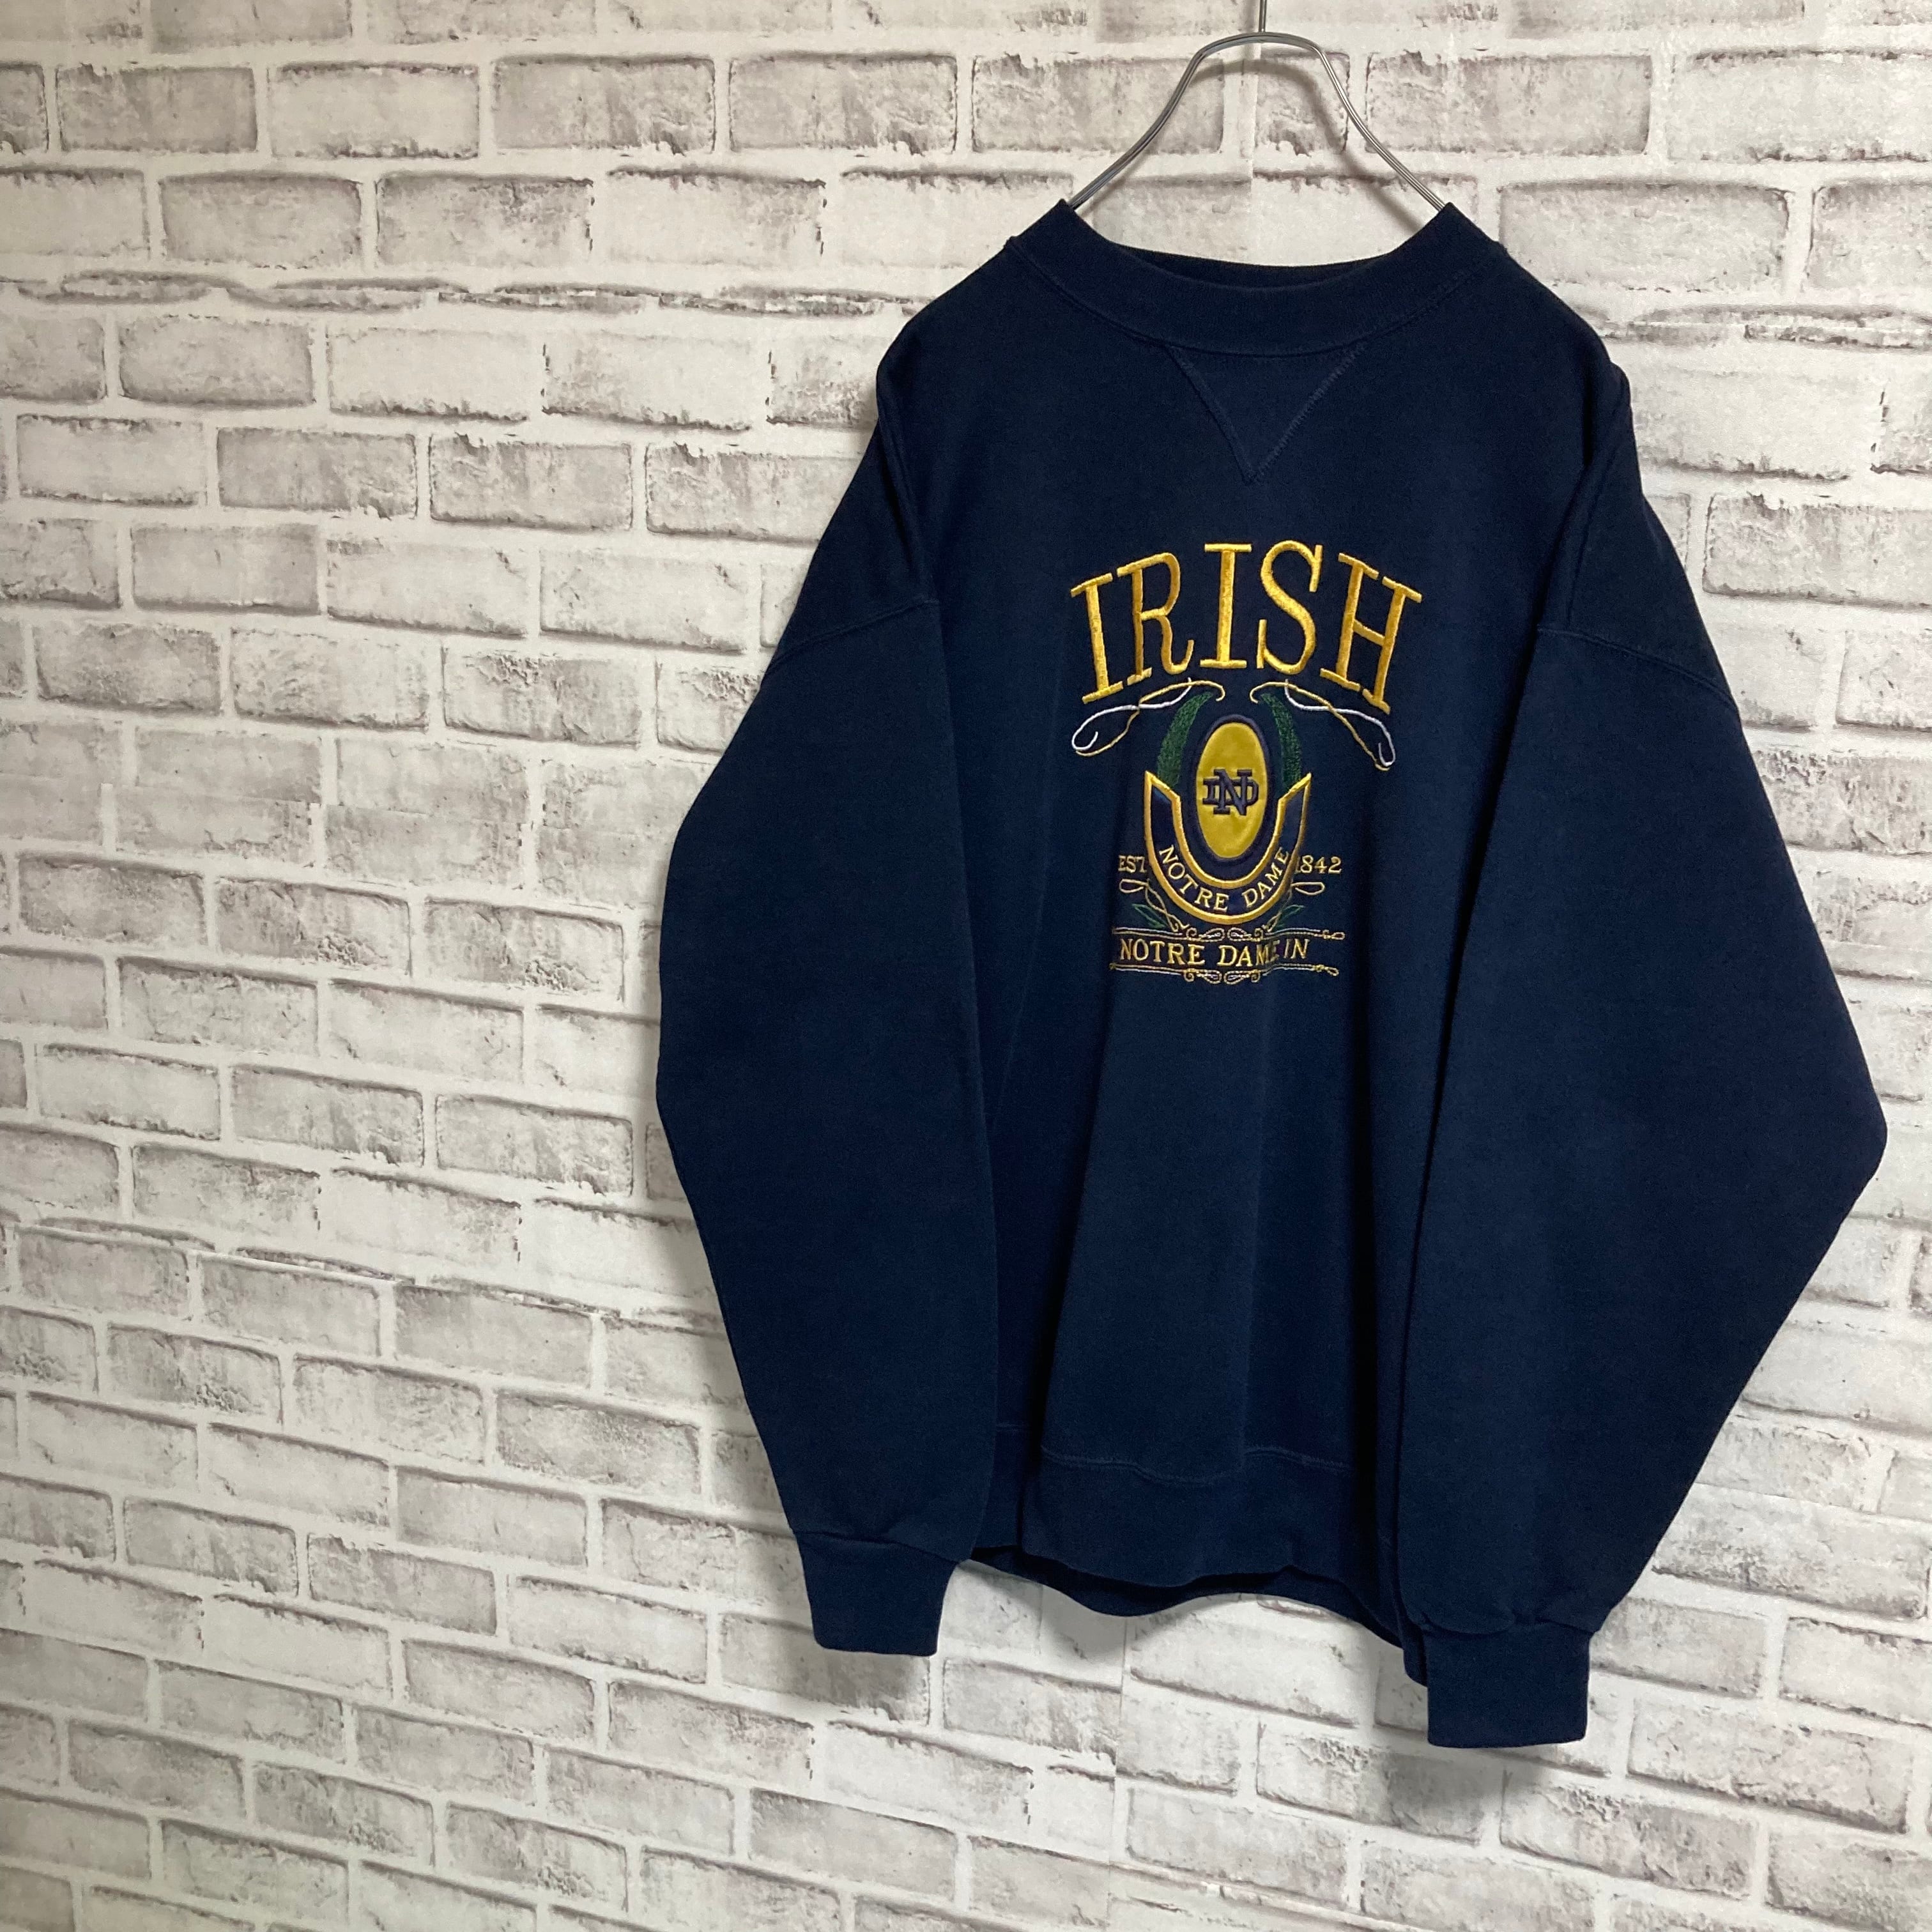 【Mid west Embroidery】L/S Sweat XL Made in USA 90s “NOTRE DAME” スウェット トレーナー  USA製 ノートルダム大学 カレッジロゴ 刺繍ロゴ vintage ヴィンテージ アメリカ USA 古着